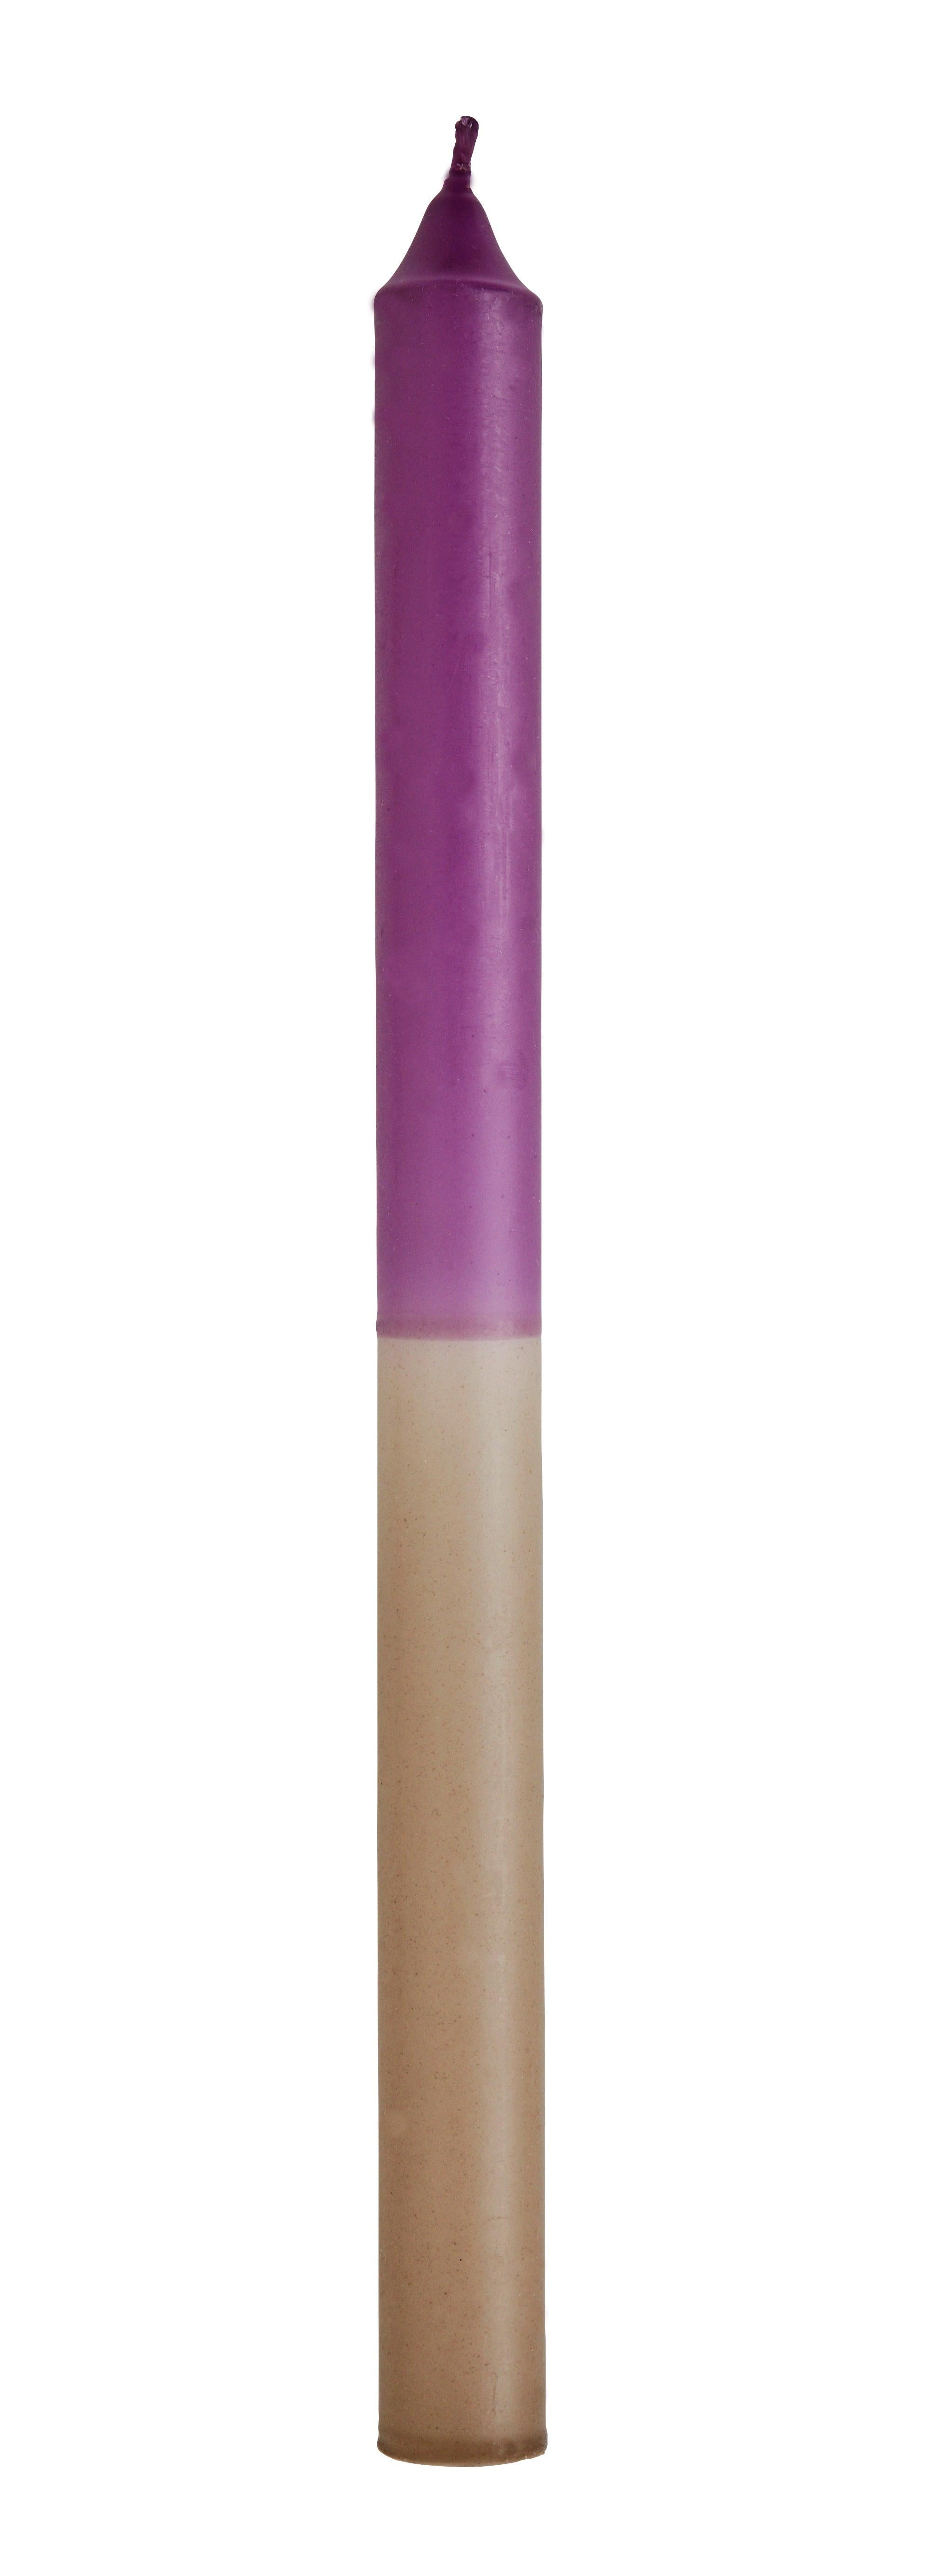 MADAM STOLTZ - TWO TONE CANDLE "PURPLE-TAUPE" - Oh Happy Life